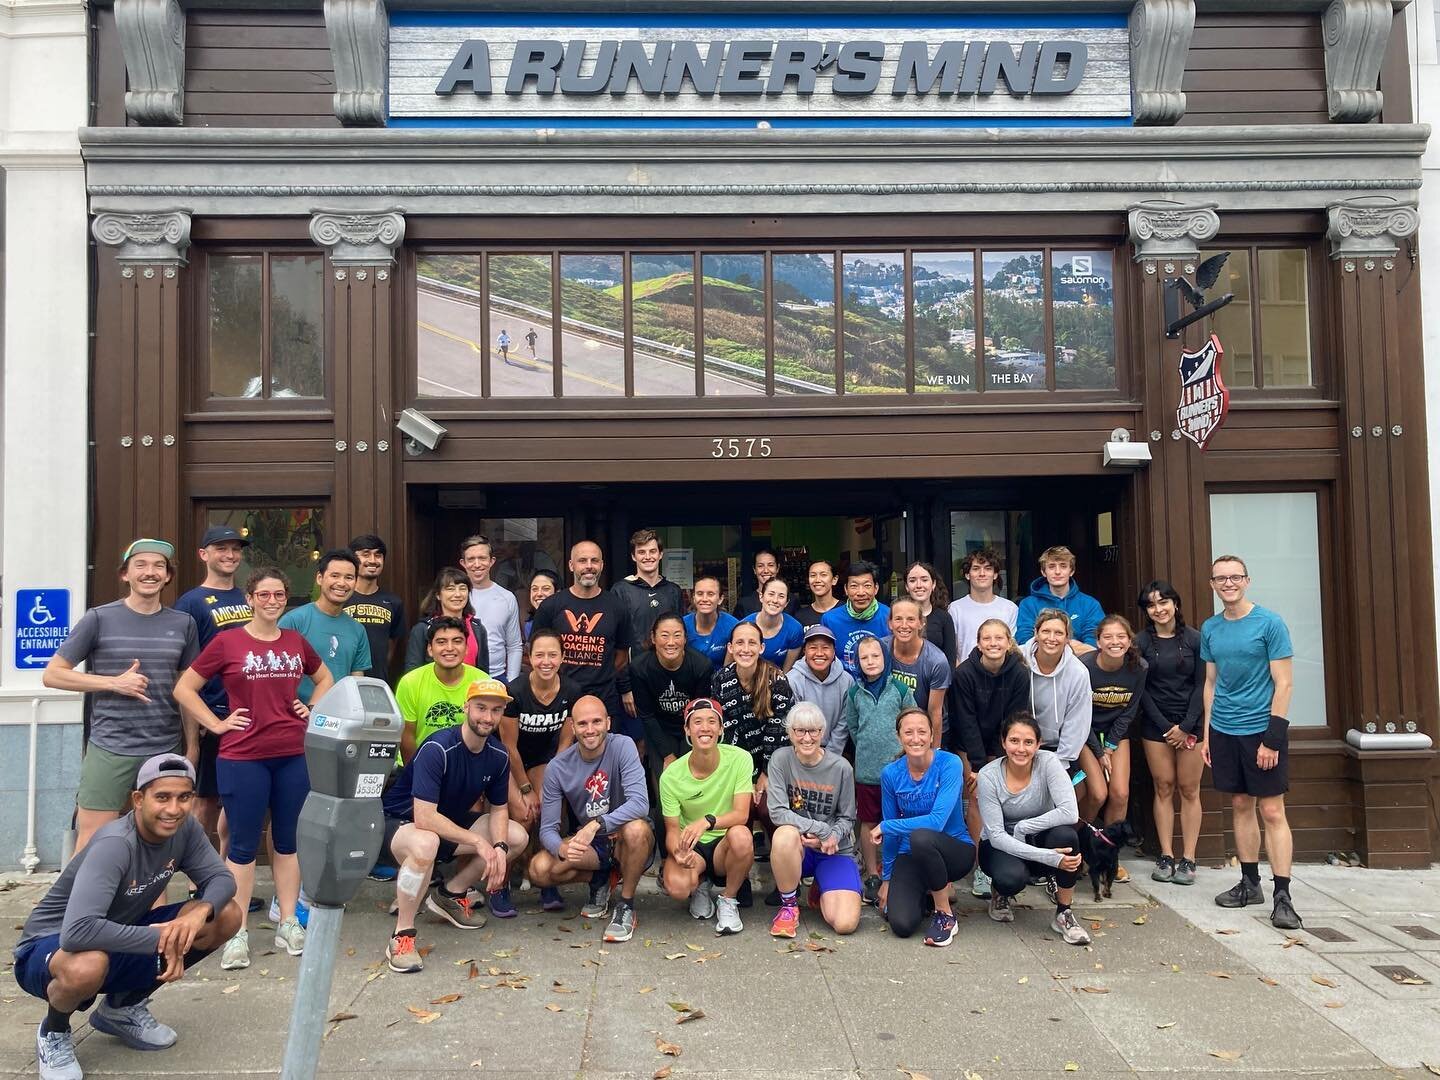 Thursday night run at A Runner&rsquo;s Mind (SF)! Me + my SF running family!

ARM is one of the best running stores in the USA (literally, check the rankings!!). If you have met Eileen, Nick, Brooke, Chance, or anyone else in the ARM team, you will k